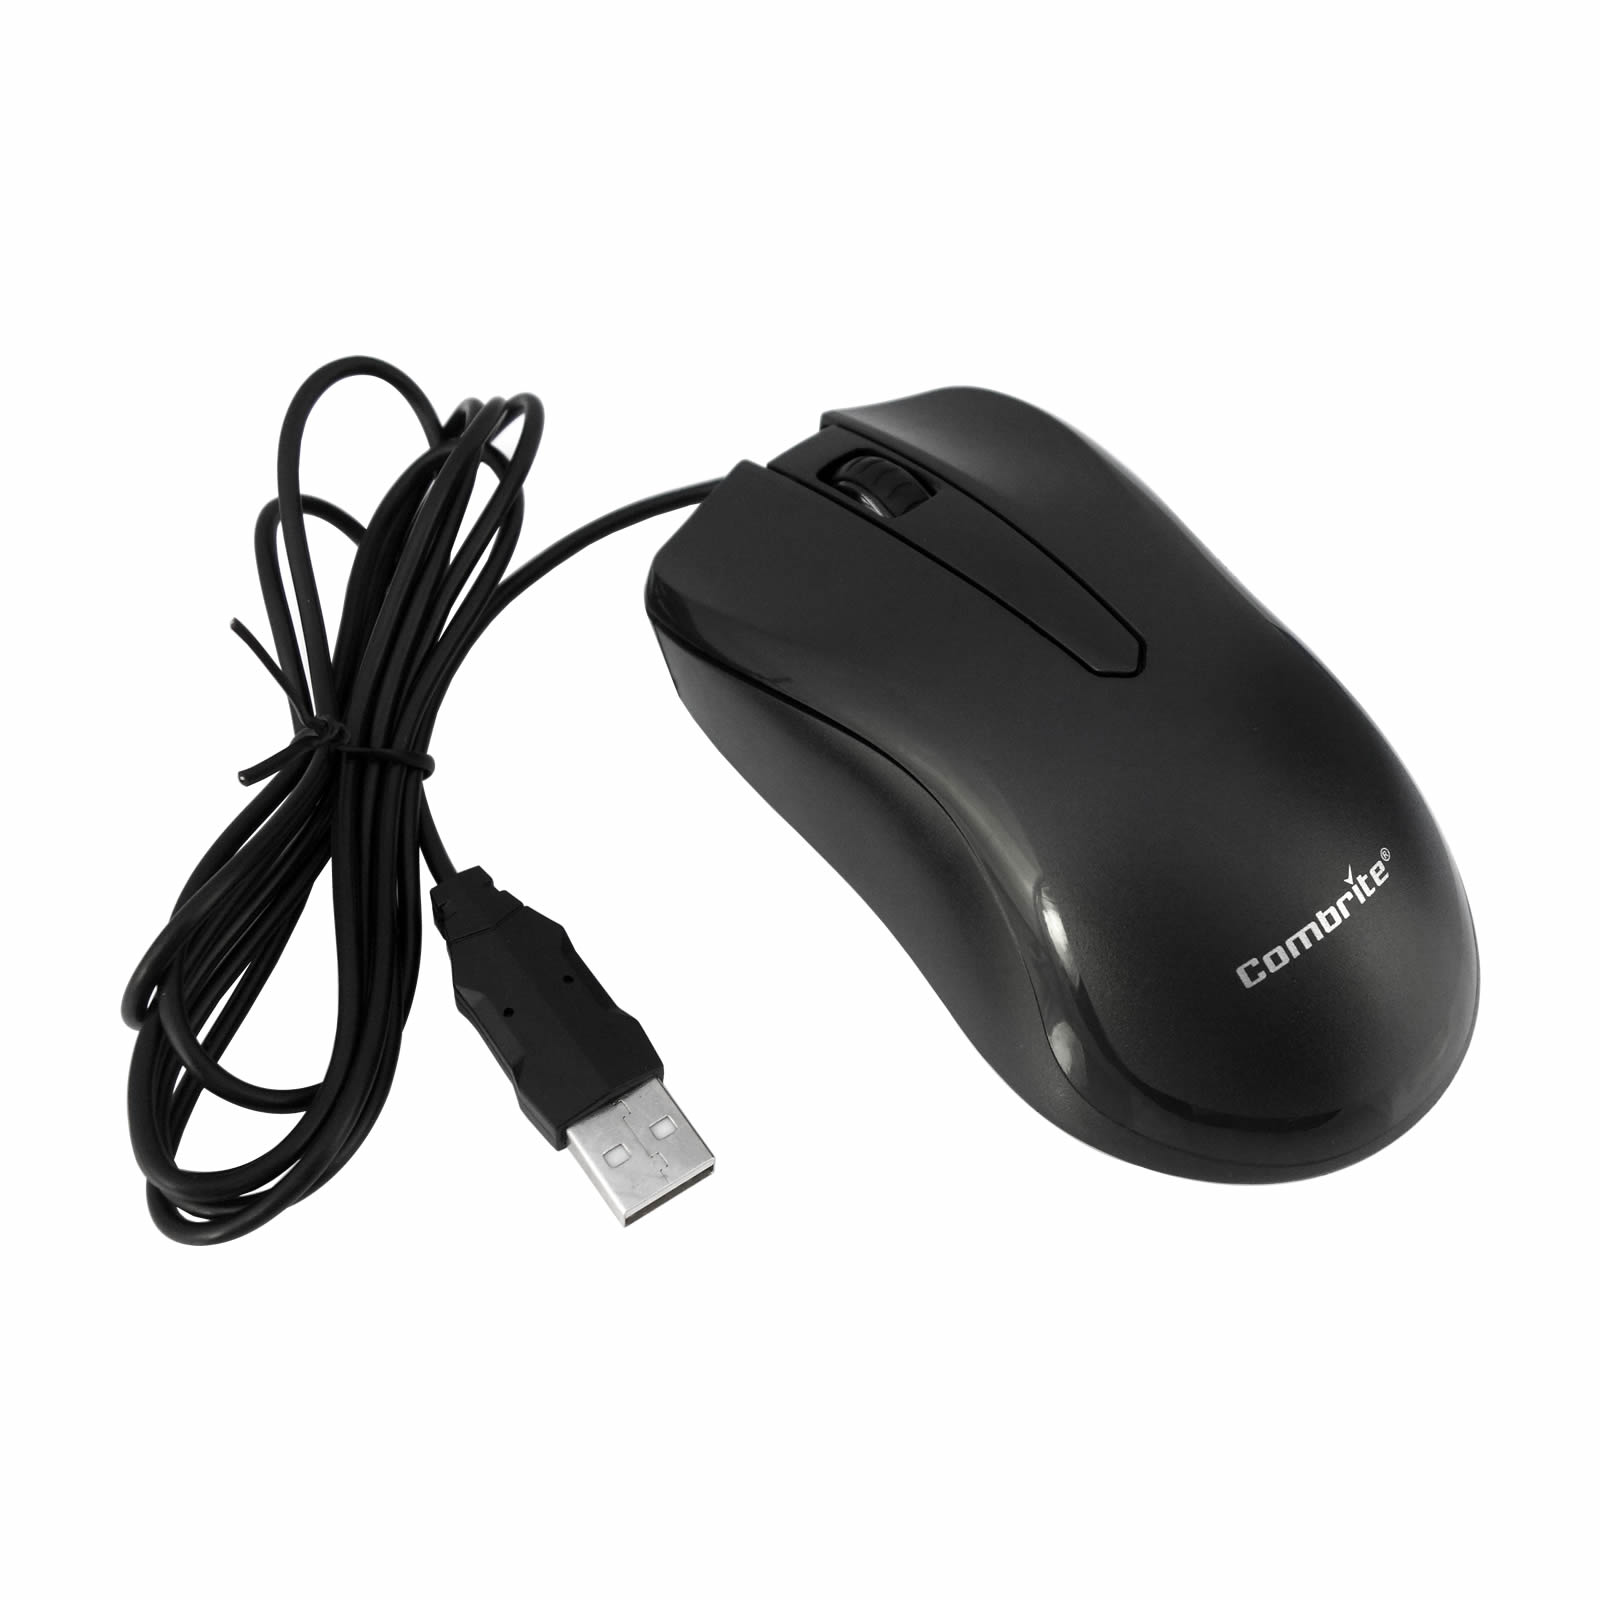 usb optical mouse driver install